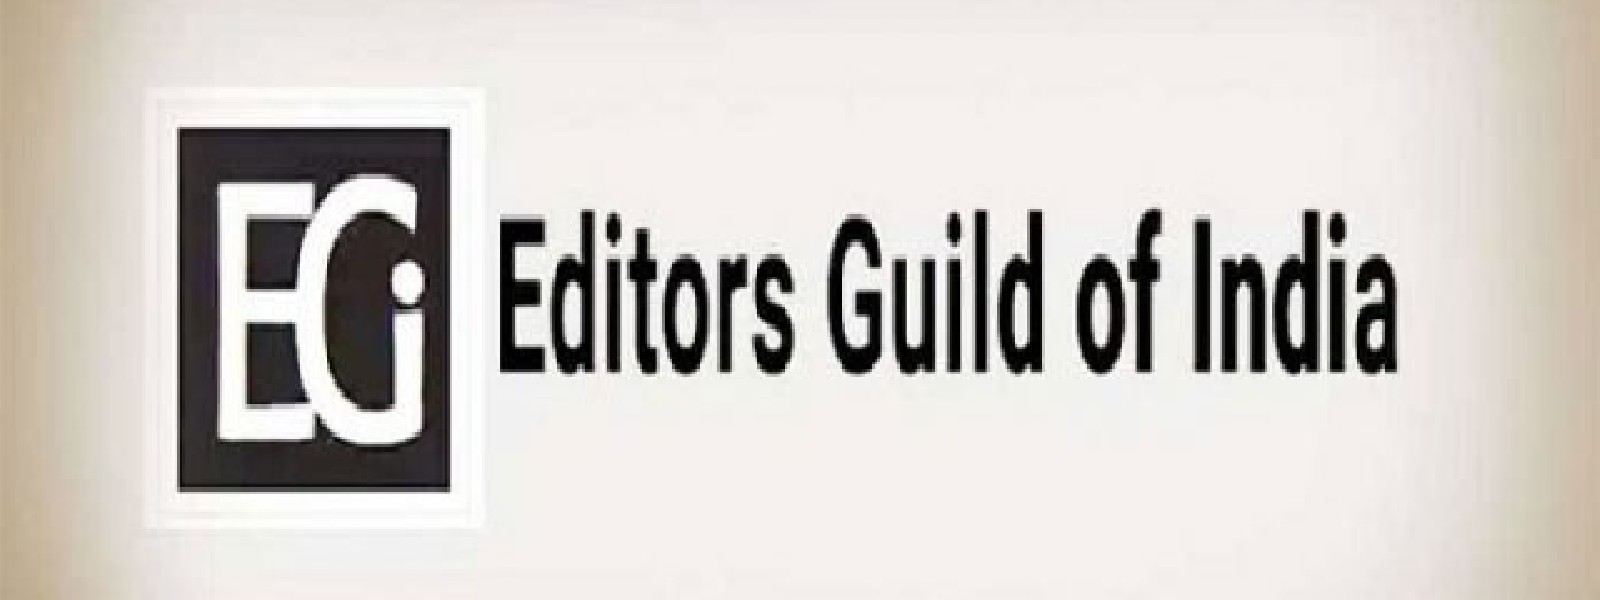 Editors Guild of India urges Adani group to withdraw defamation case